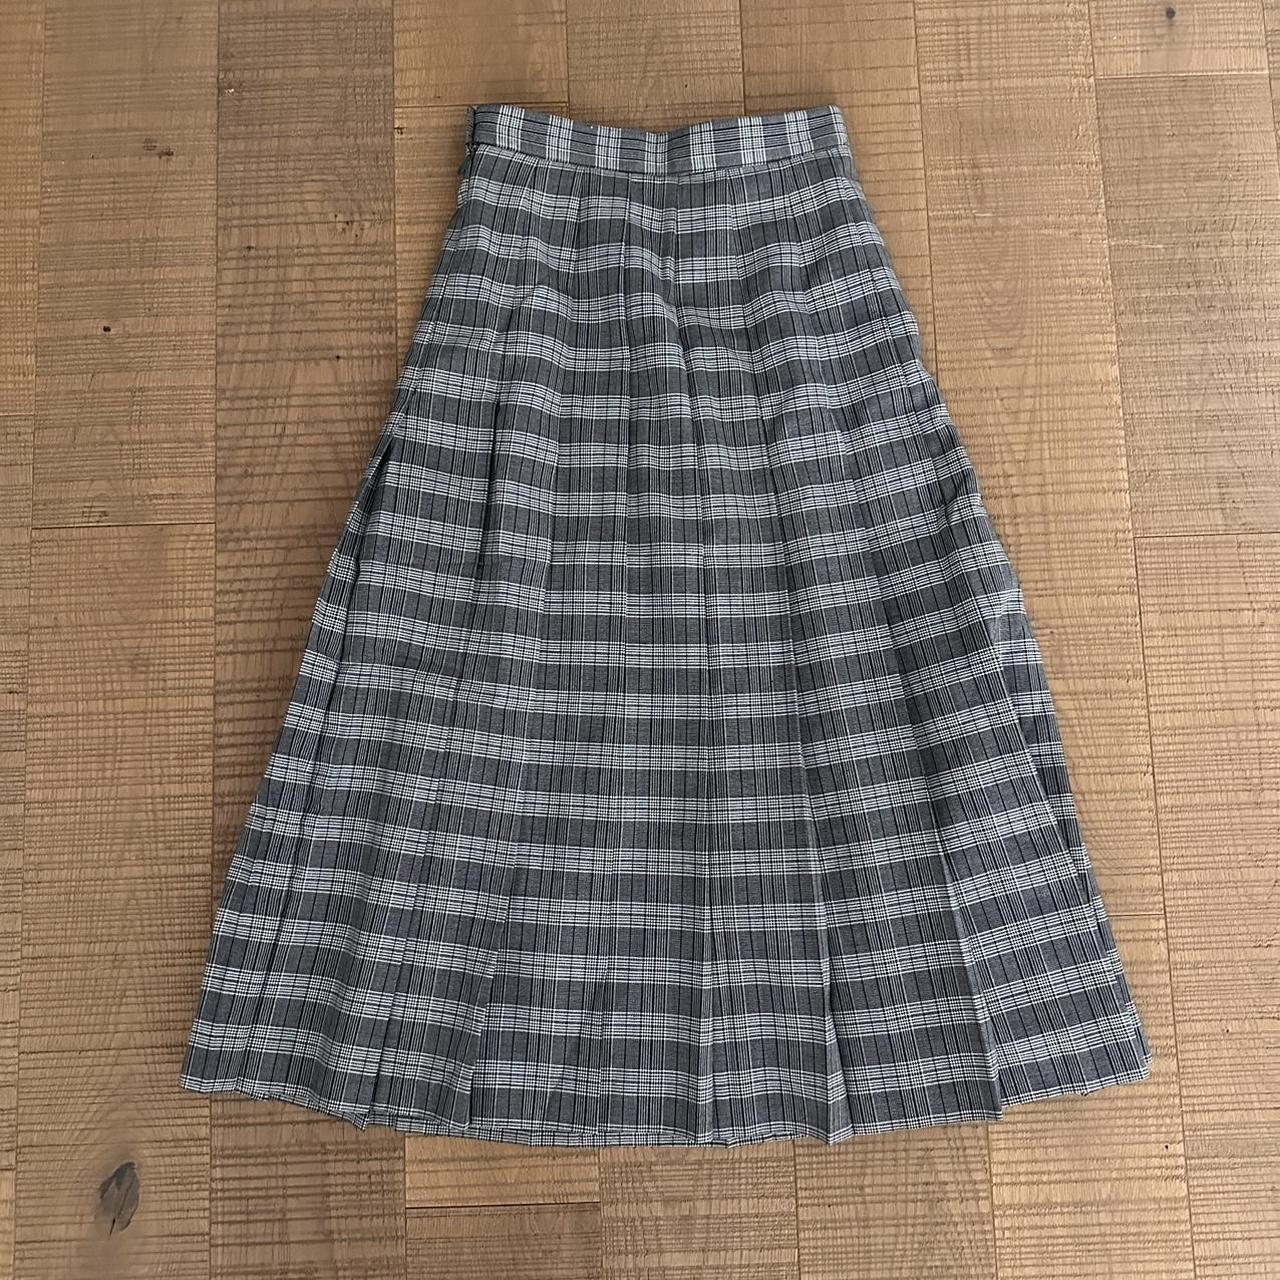 Vintage check, pleated skirt. I’m 5ft 2in and it... - Depop